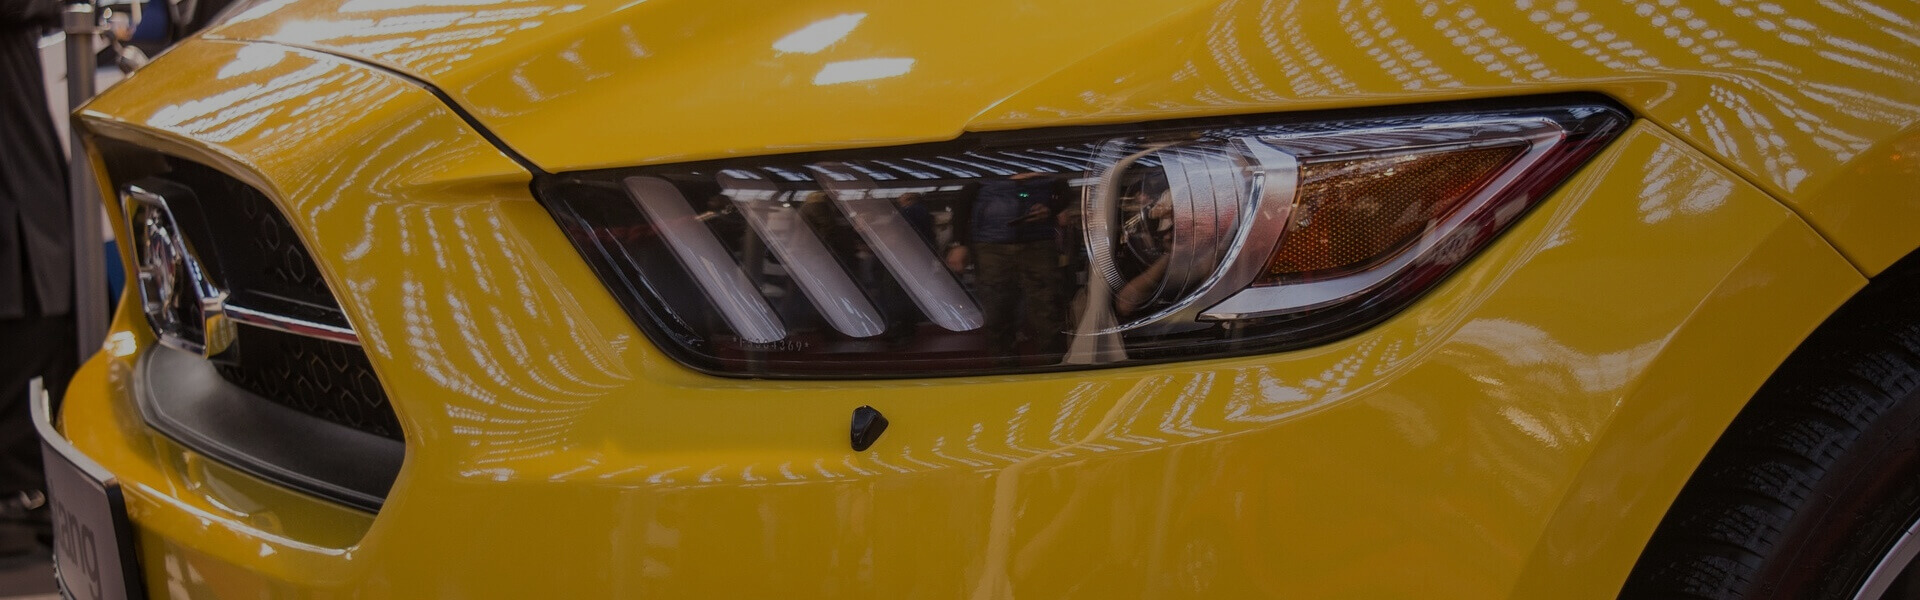 Close up image of the headlight of a yellow Mustang